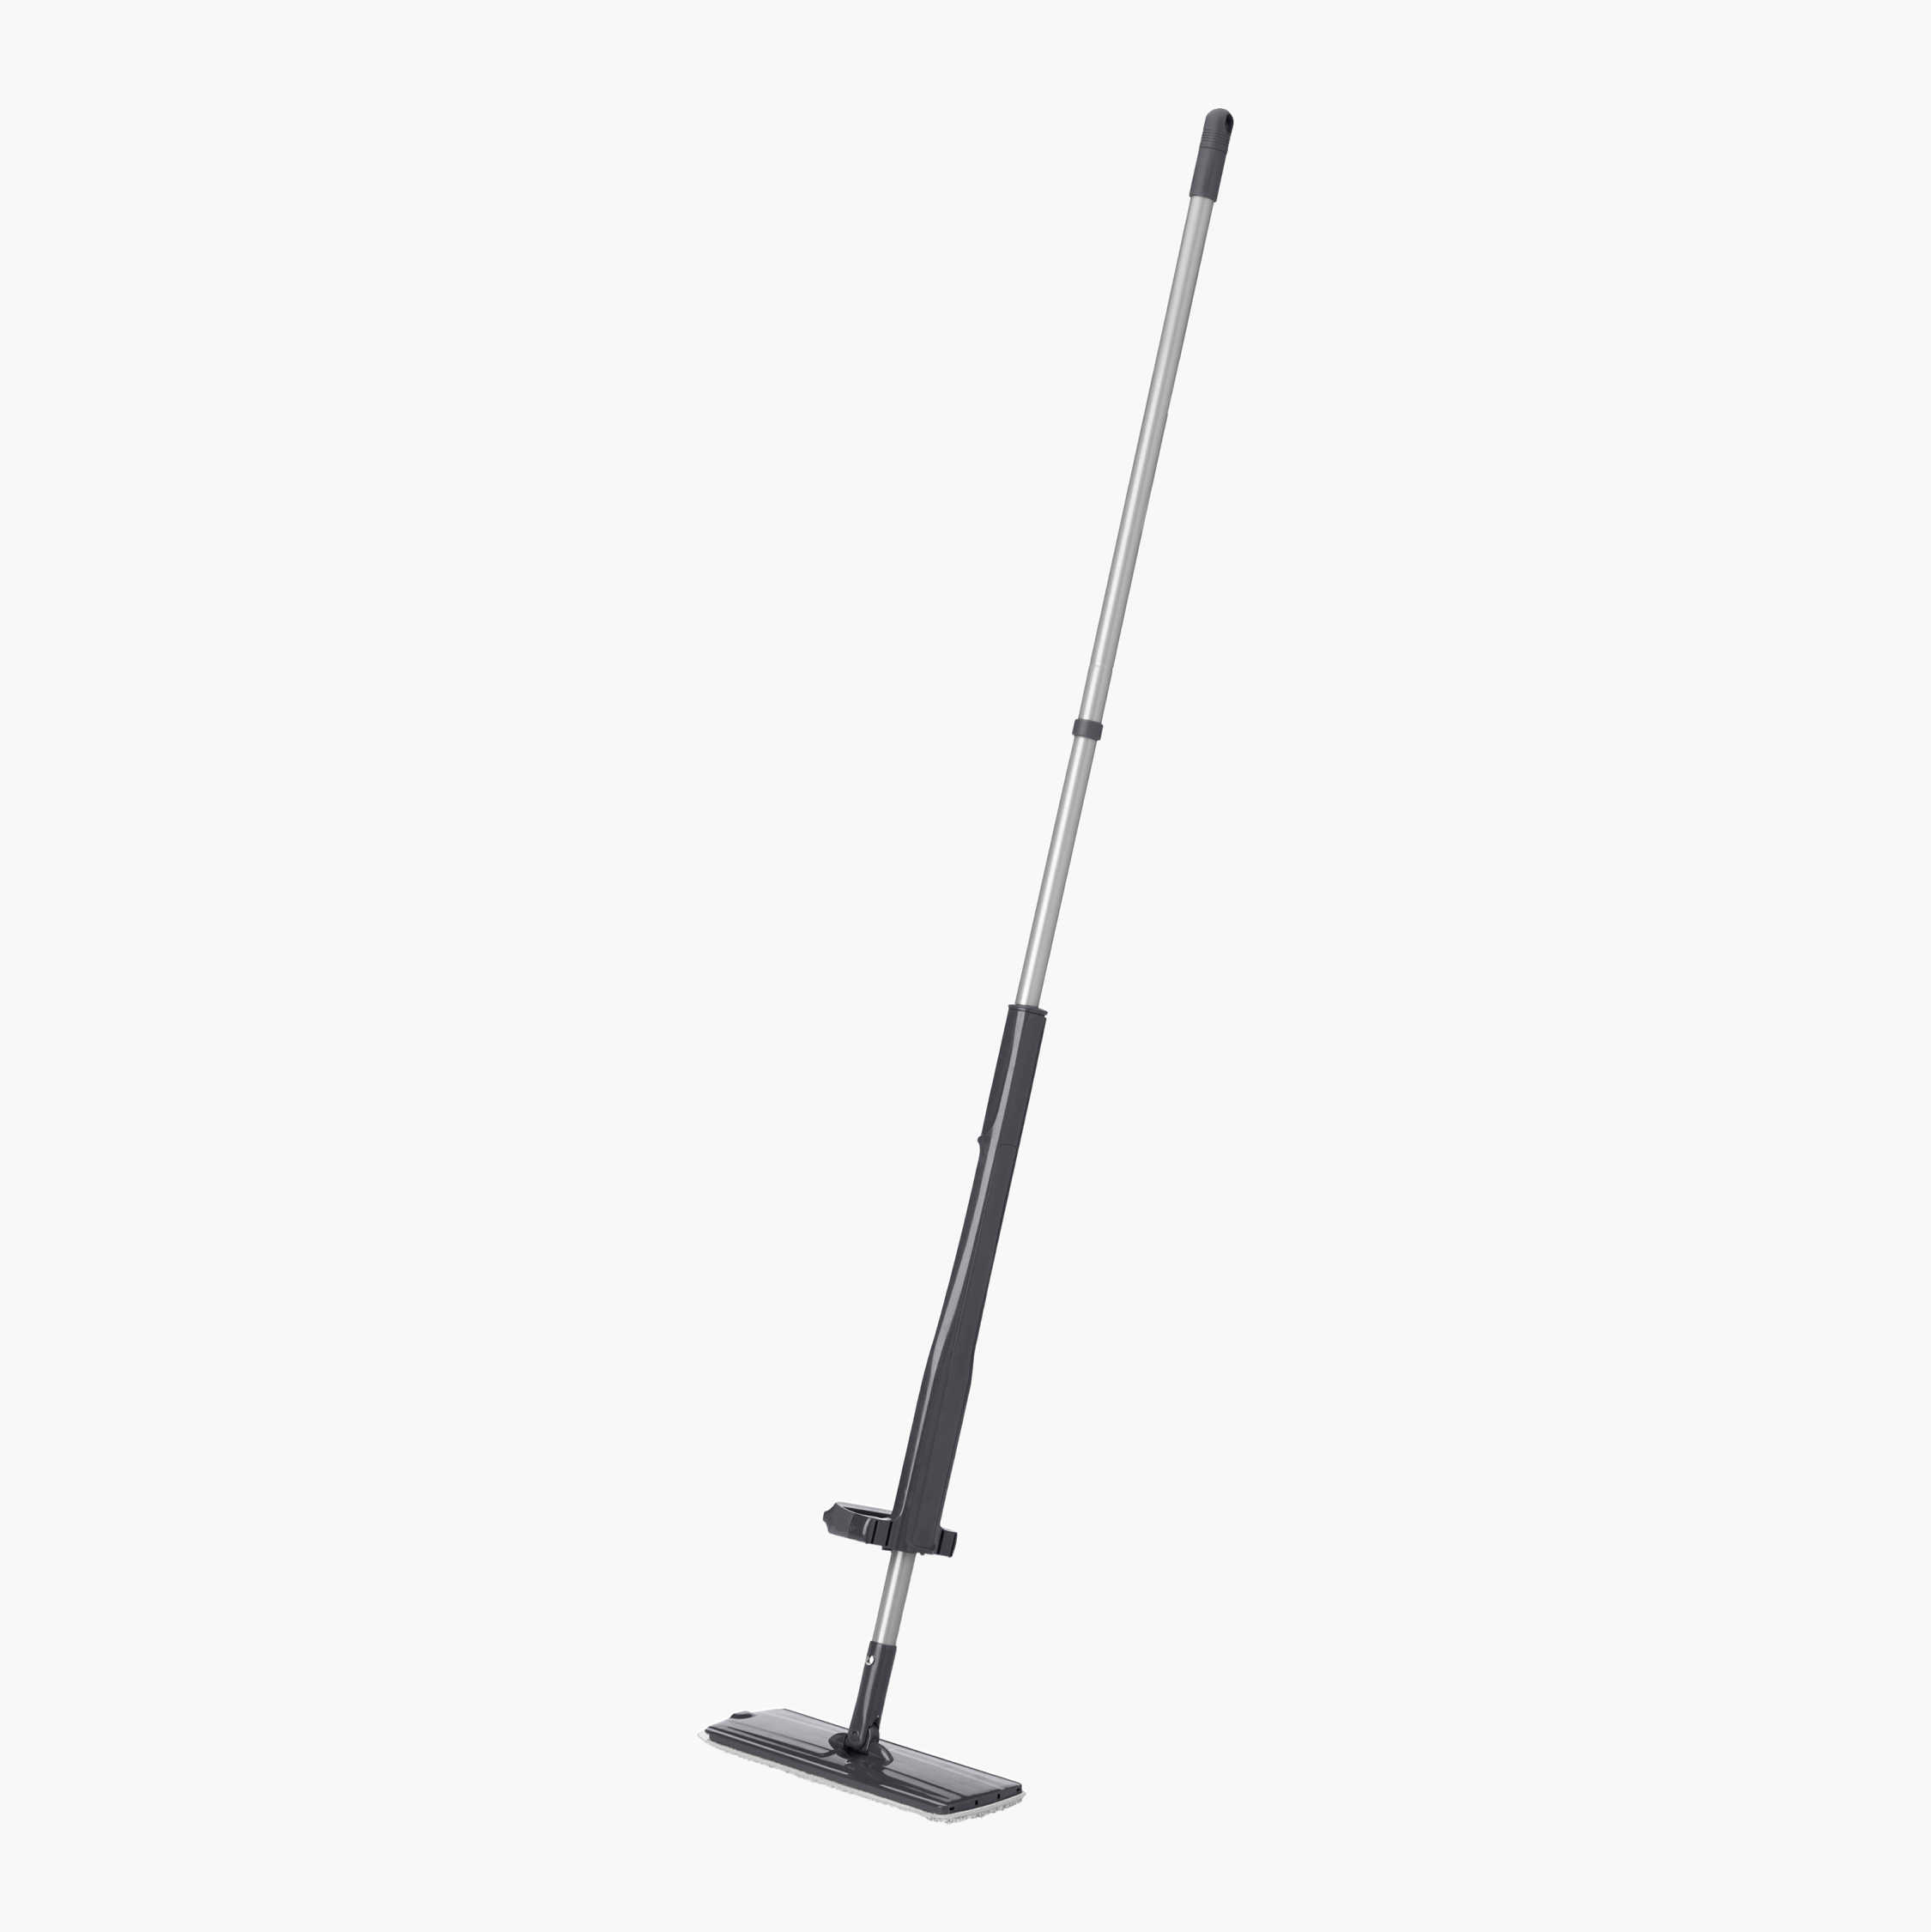 Wringing Microfiber Twist Mop with Telescopic Stainless Steel Handle for Household Cleaning Masthome Easy Self